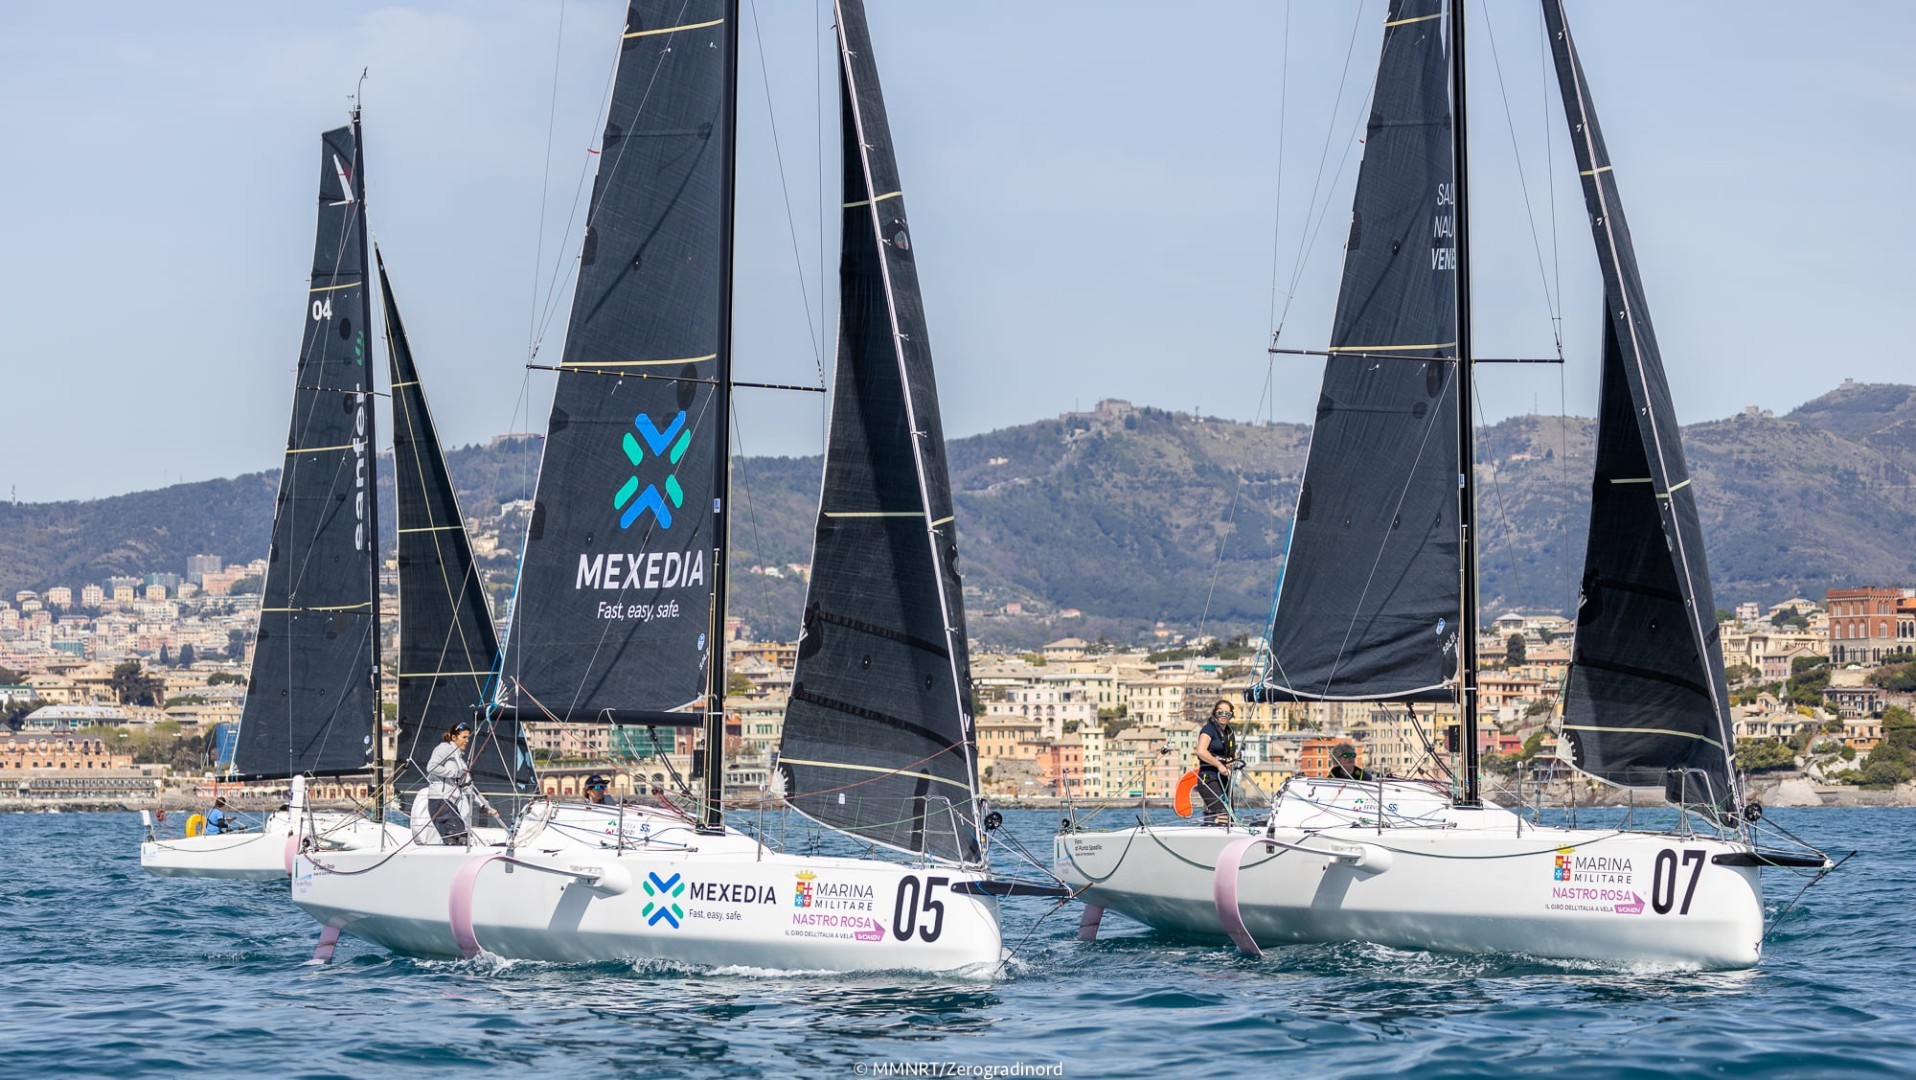 MMNRT and The Magenta Project together to promote double-handed sailing